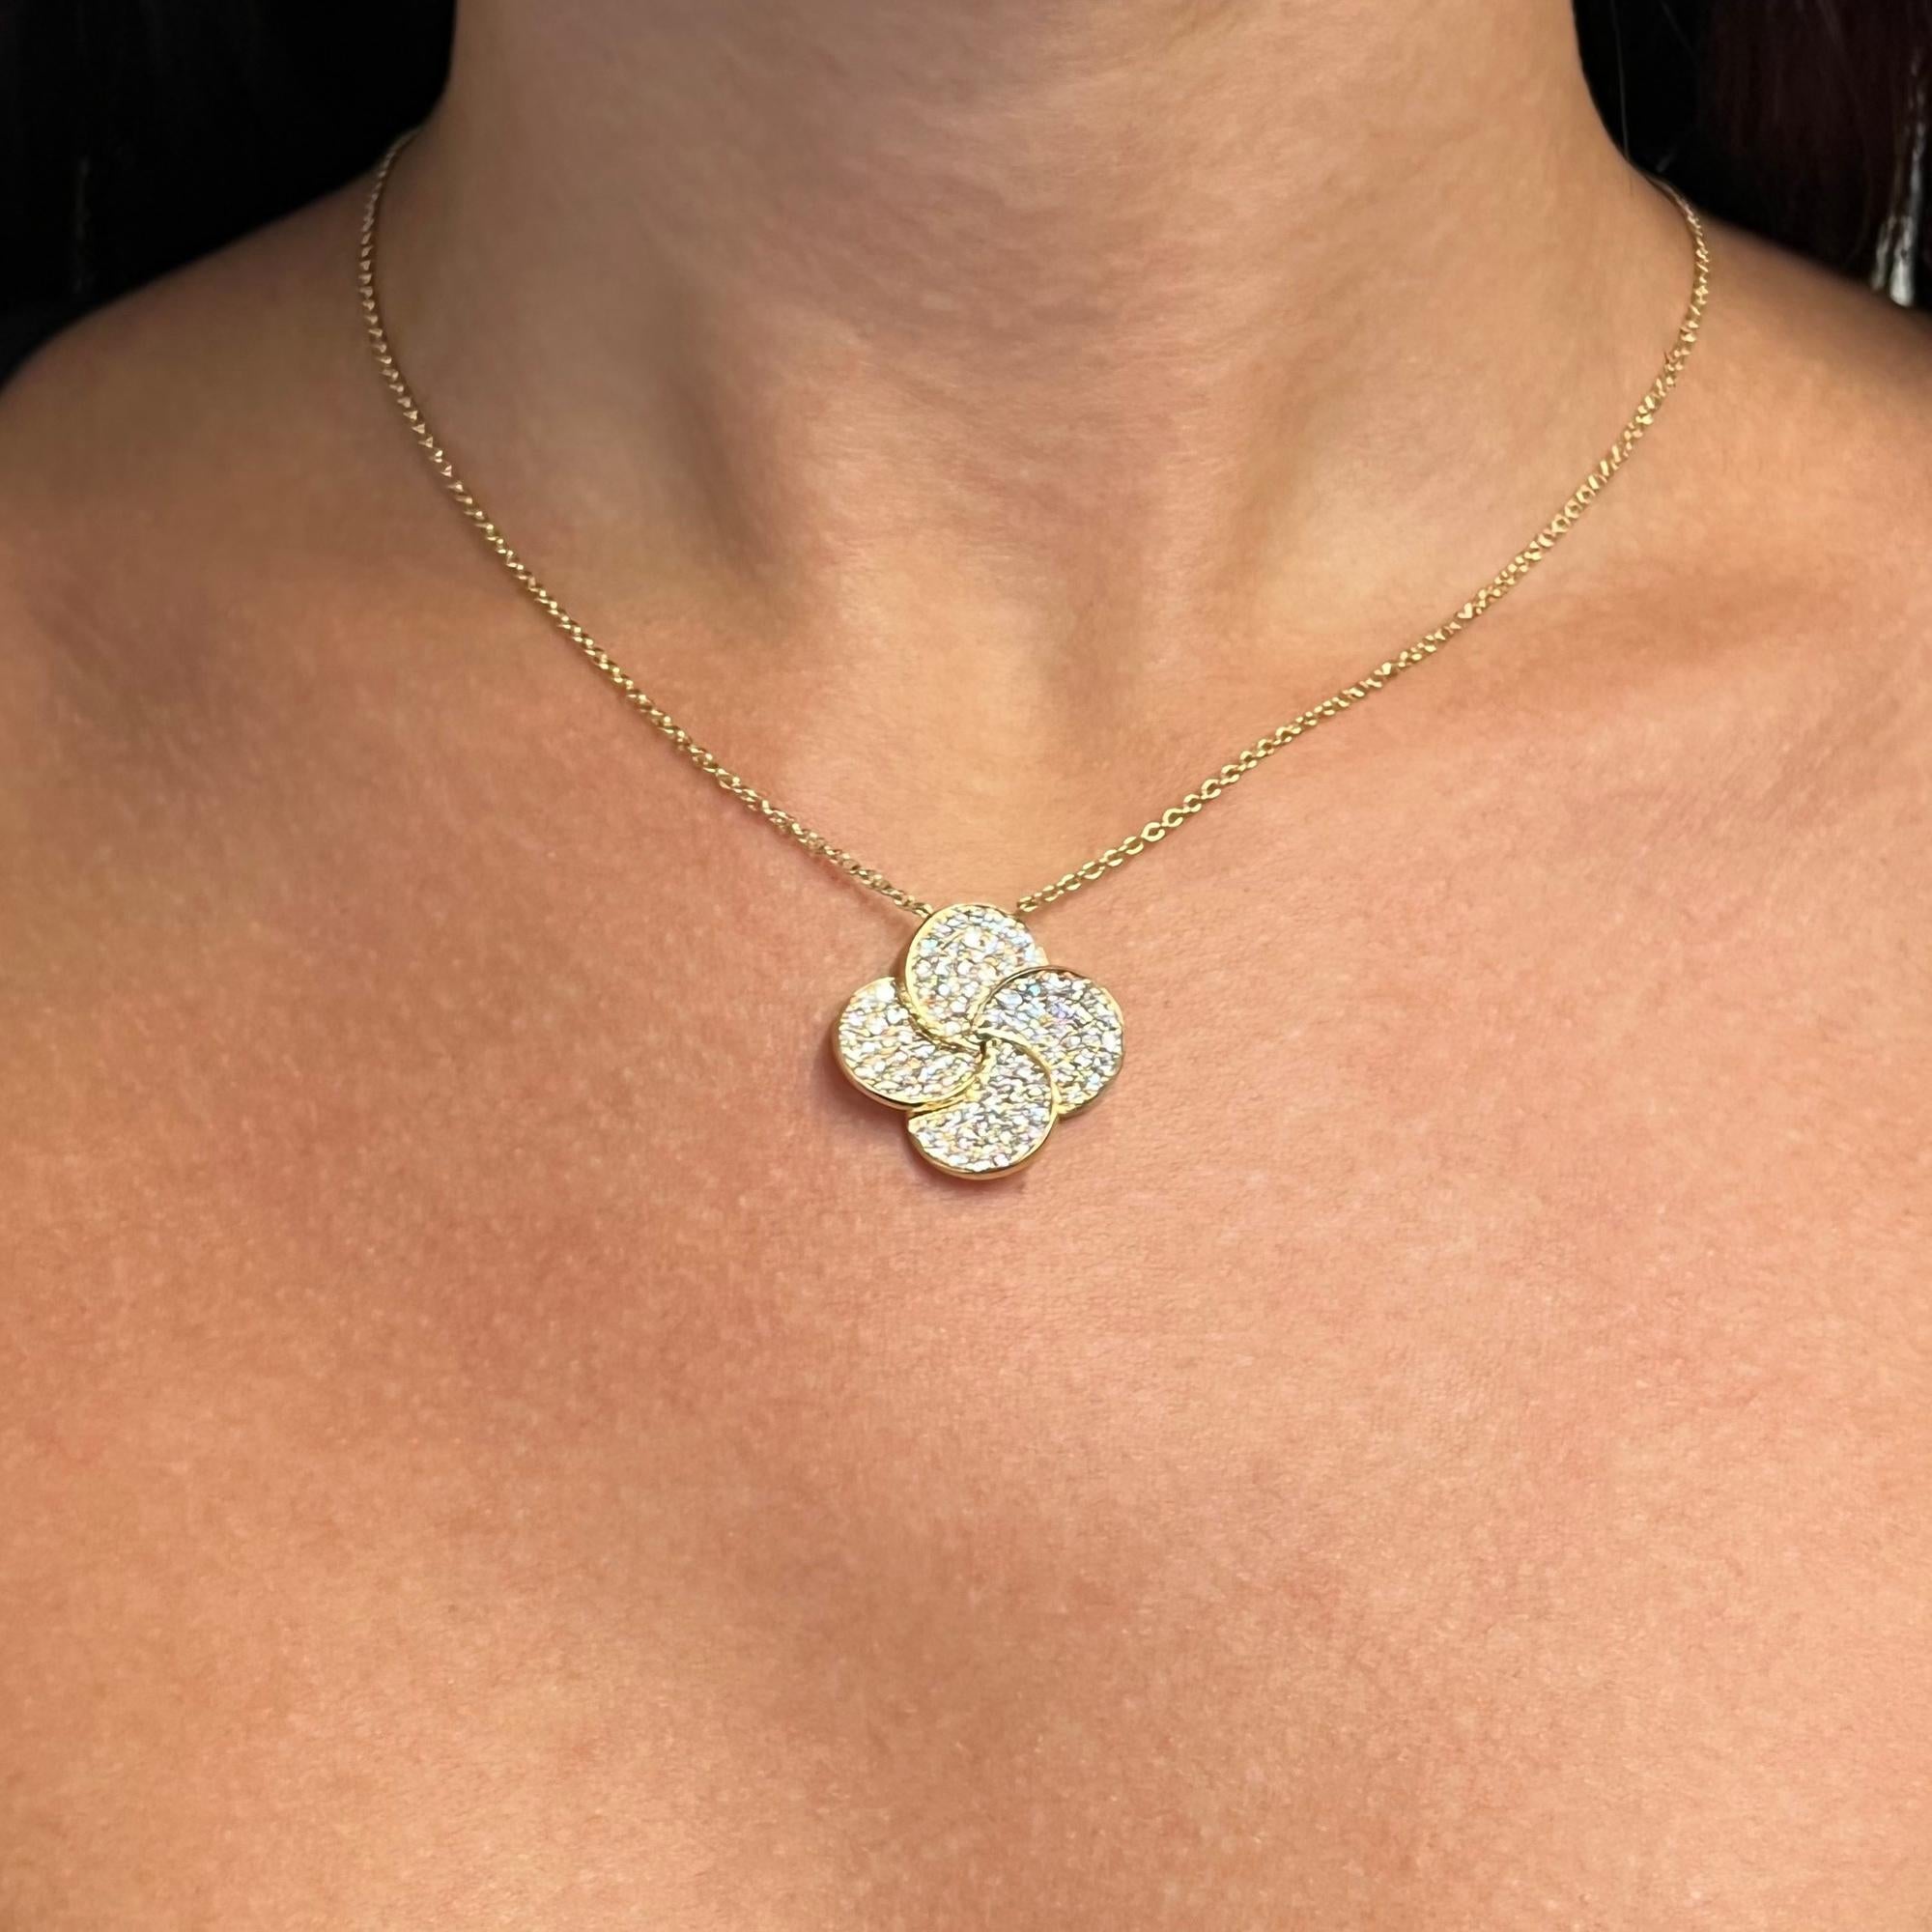 1.77Cttw Pave Set Round Cut Diamond Flower Pendant Necklace 18K Yellow Gold In New Condition For Sale In New York, NY